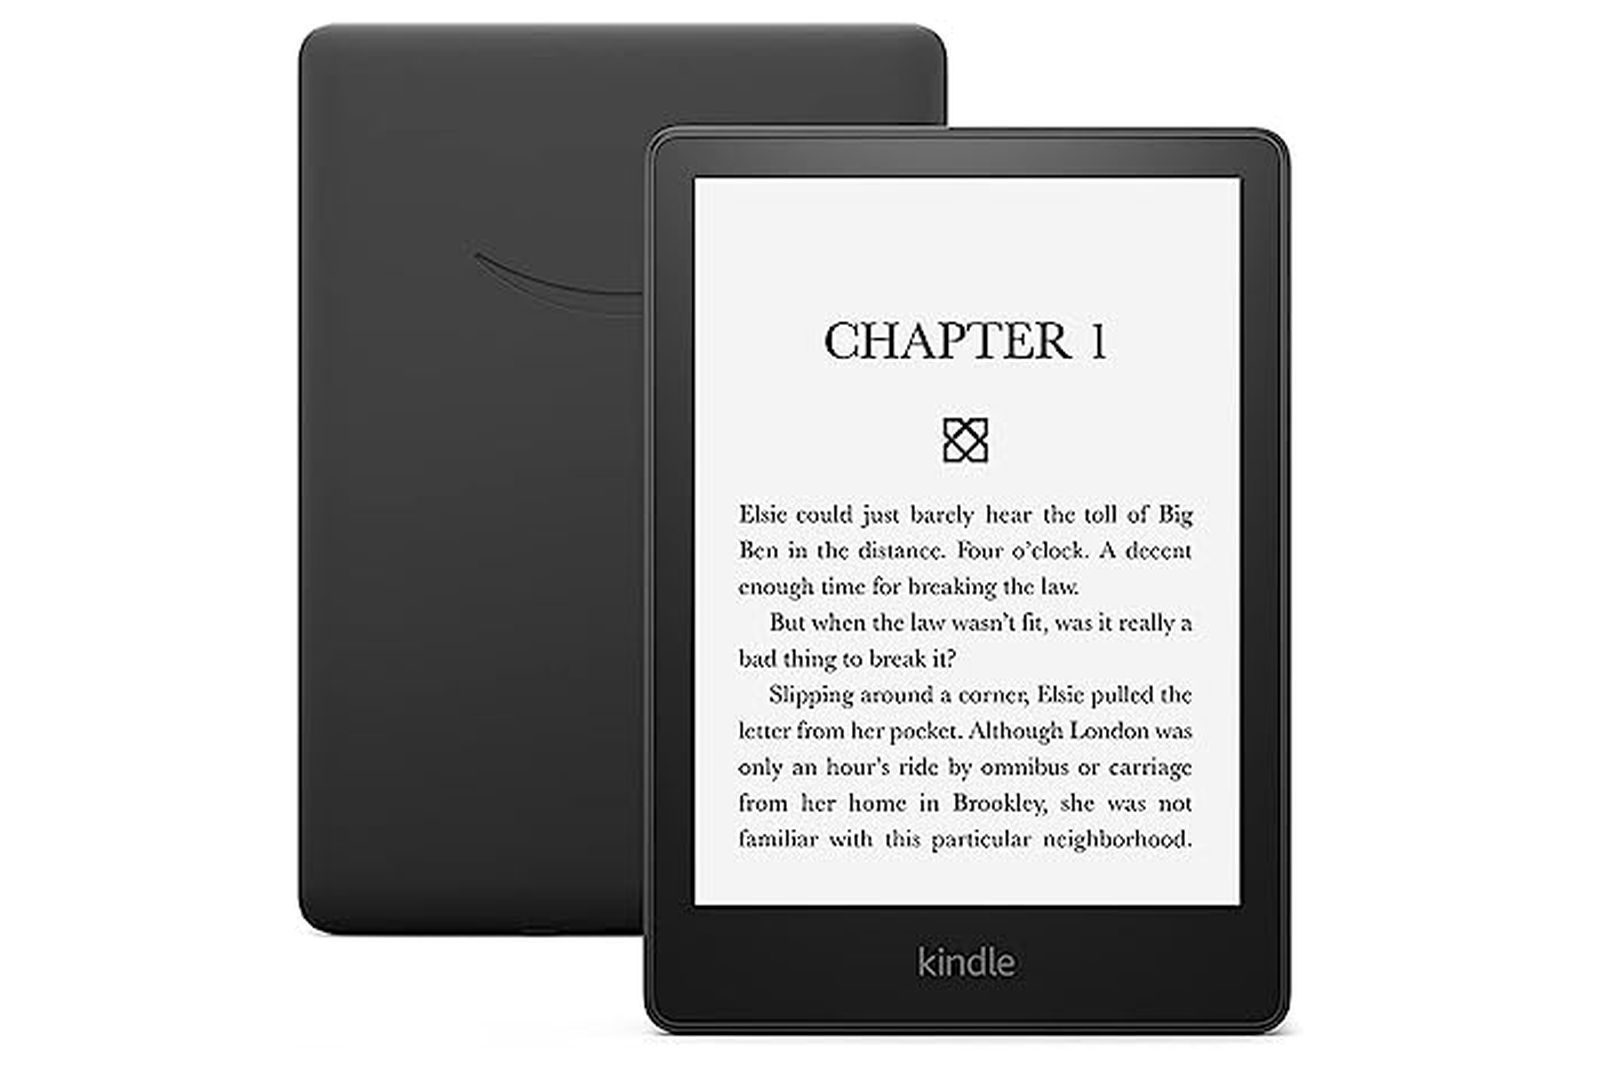 Prime Day: Get a Kindle Paperwhite for the lowest price we've seen